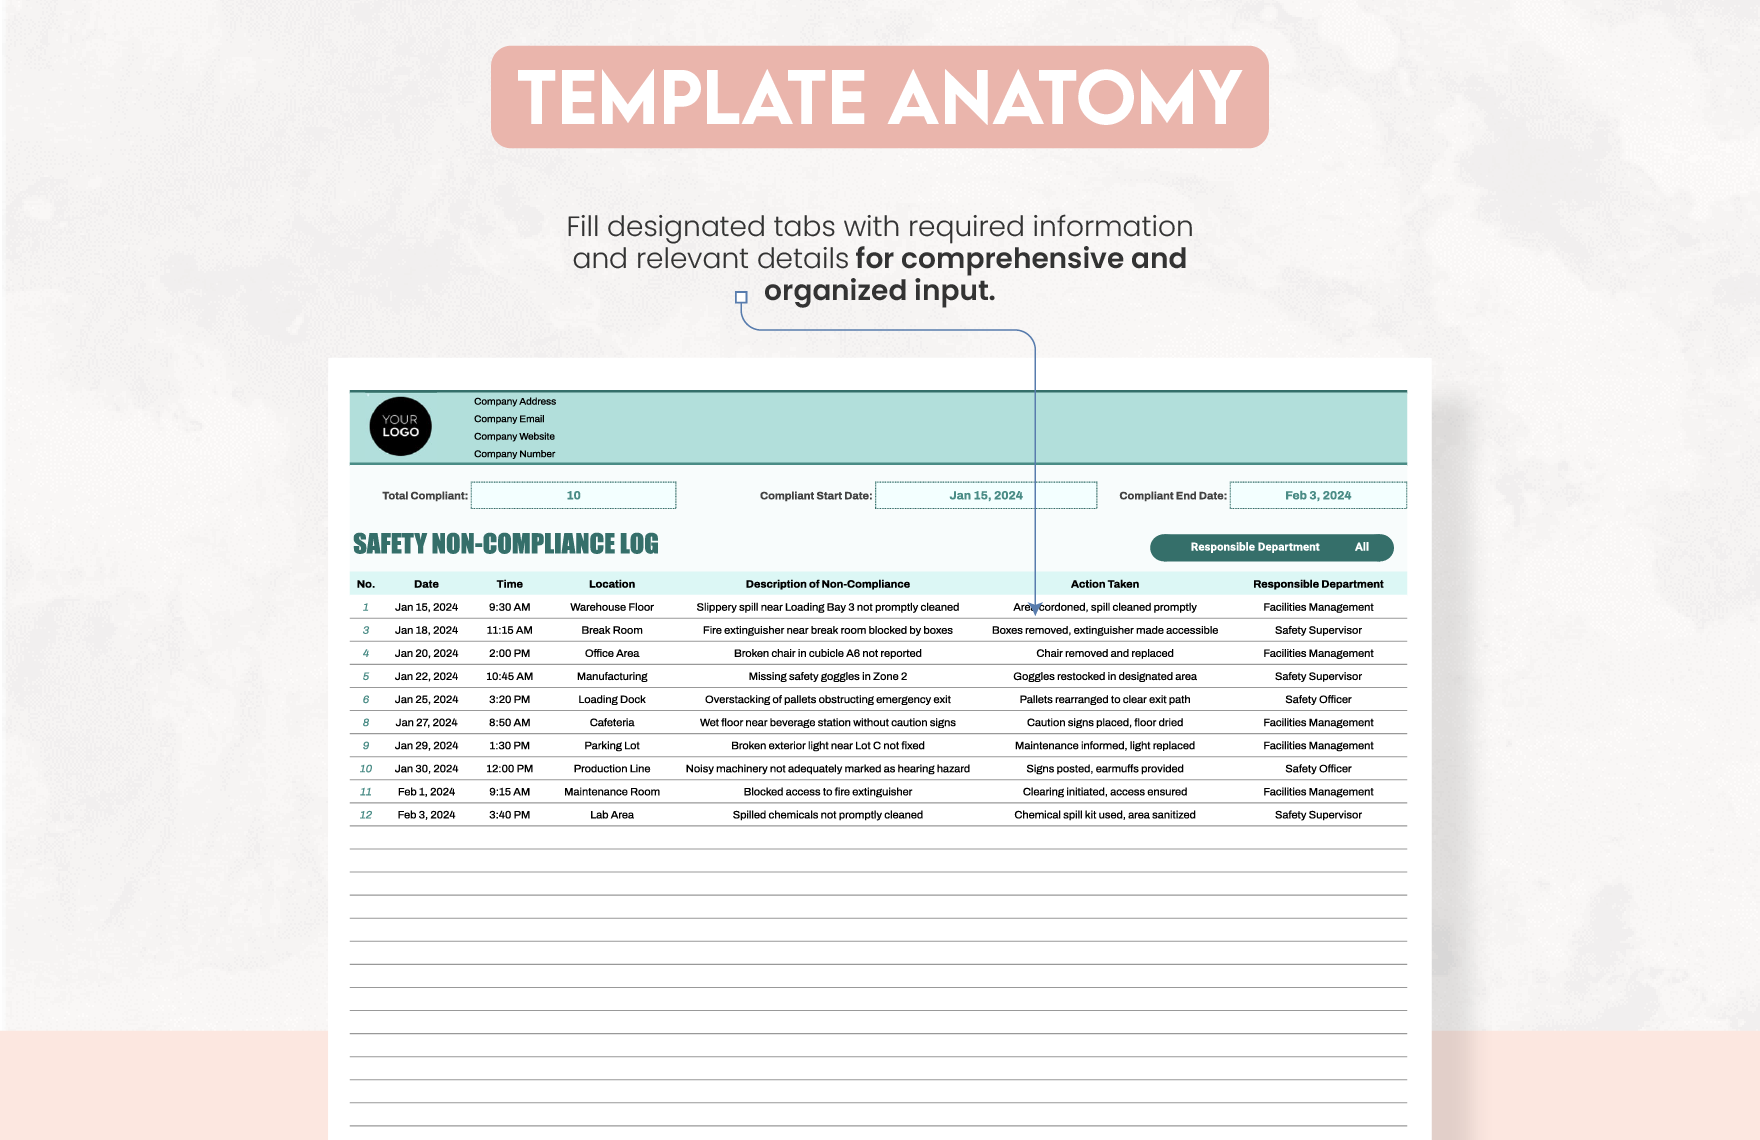 Safety Non-Compliance Log Template